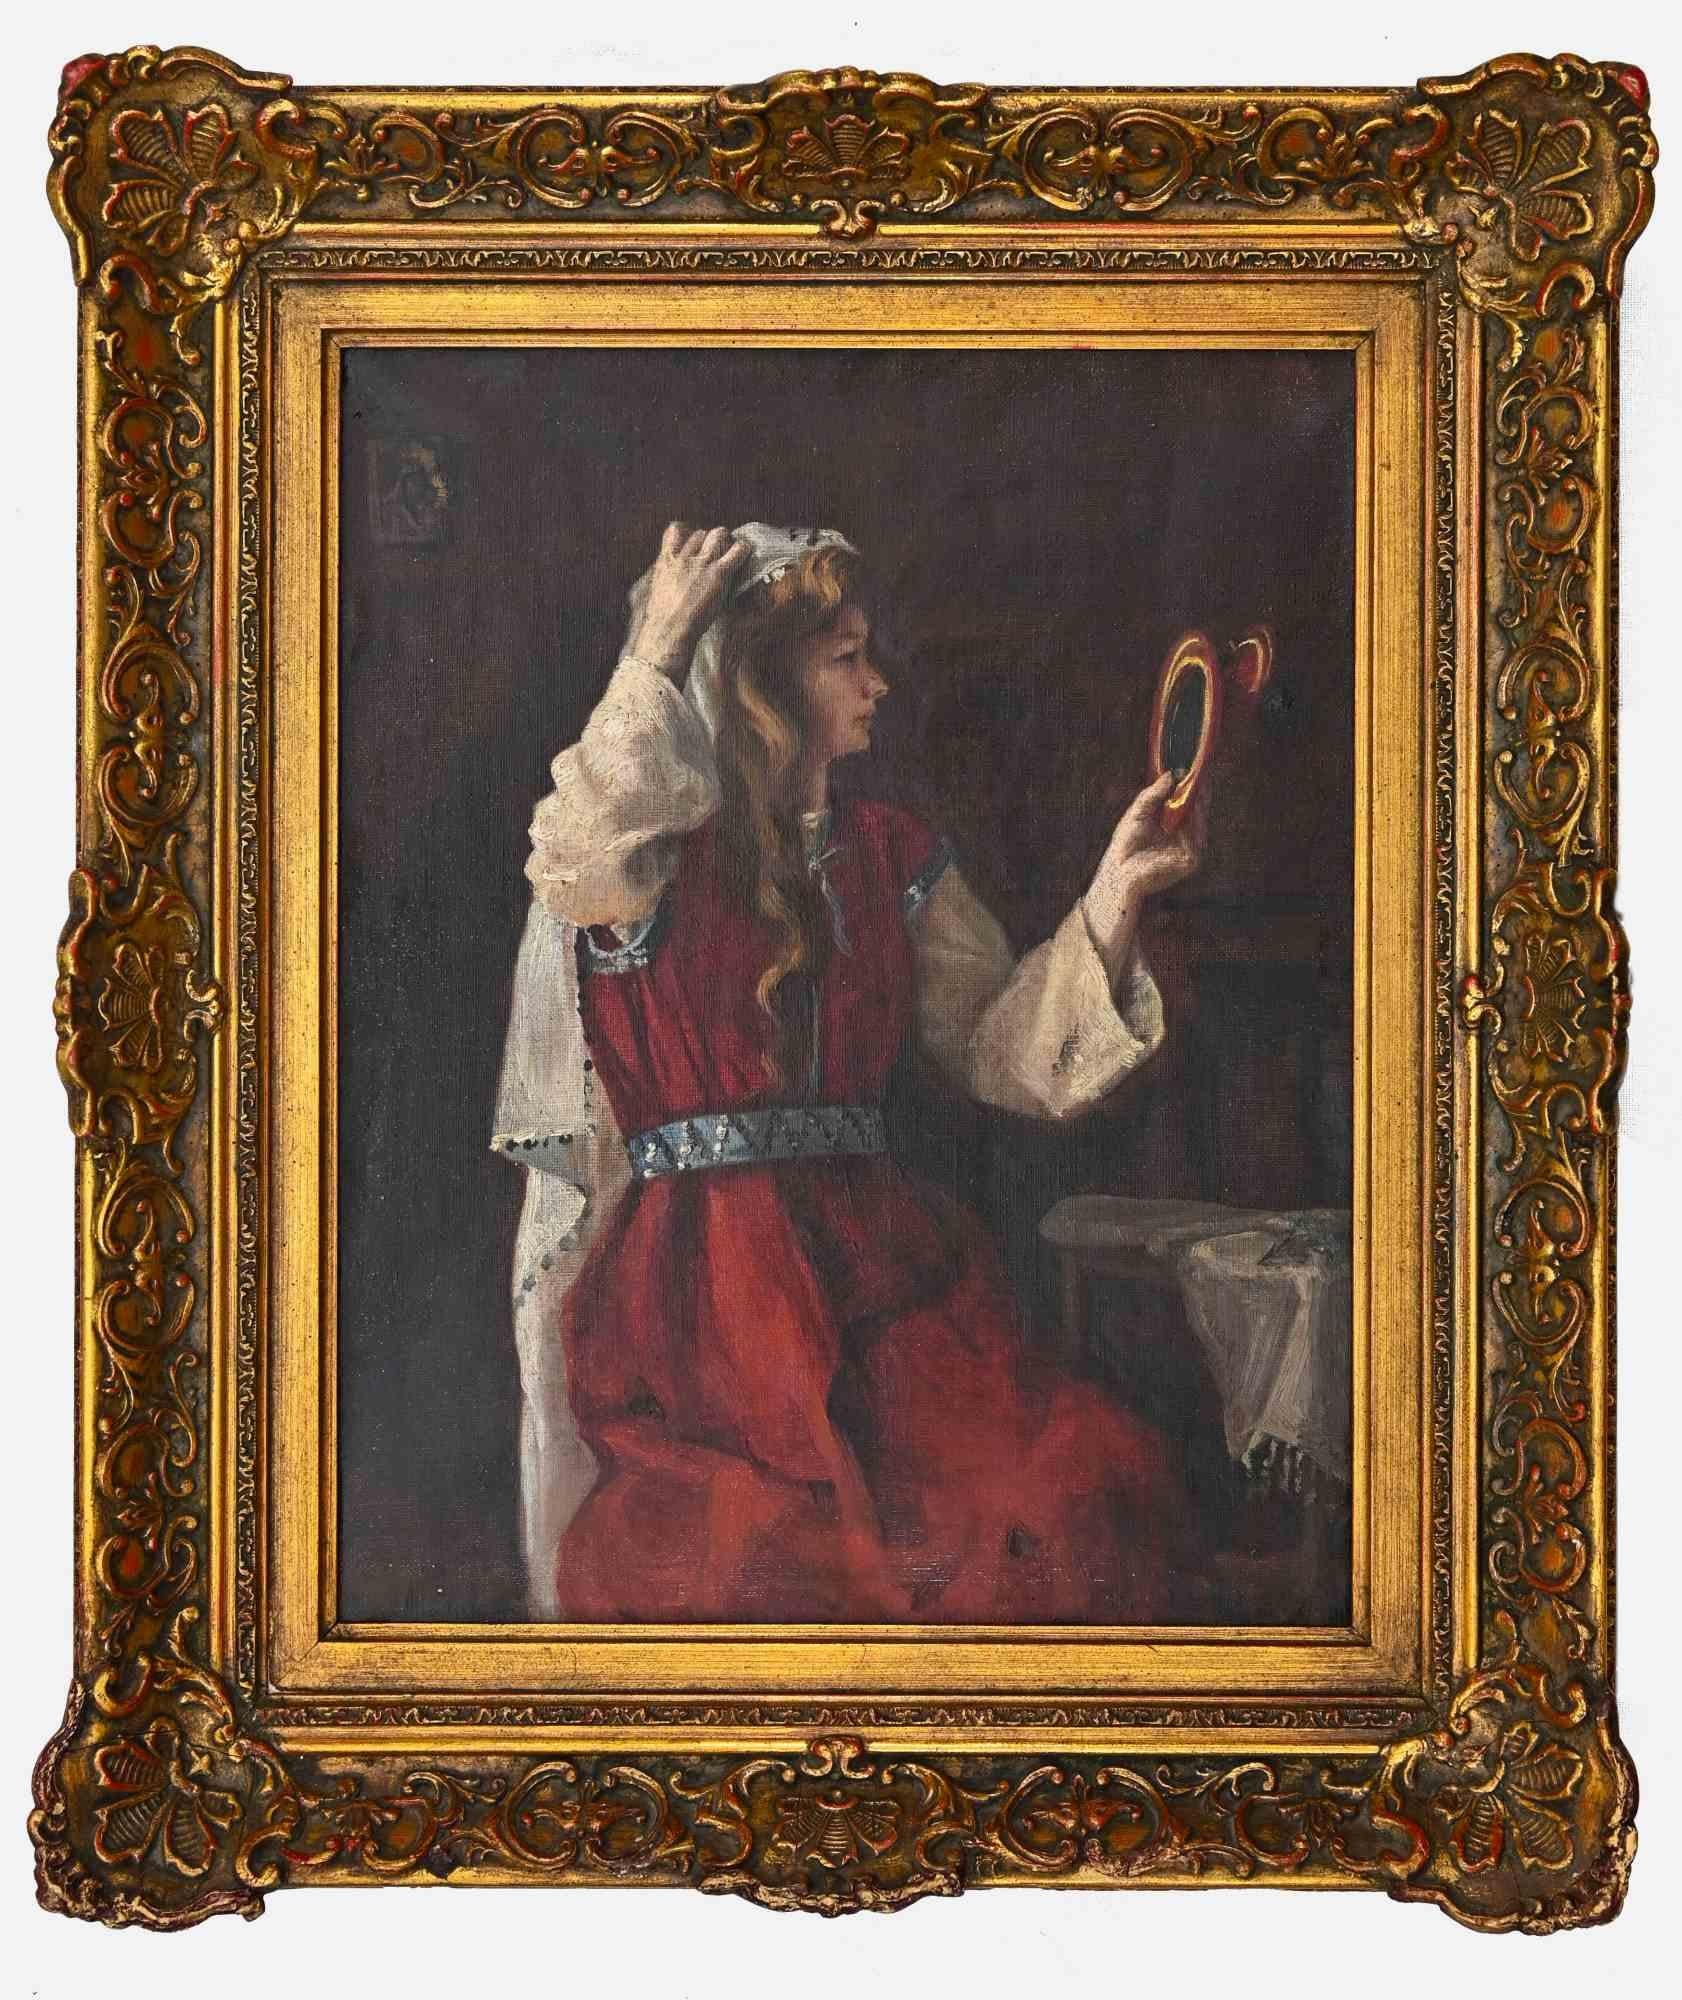 Unknown Figurative Painting - A Young Oriental Woman Looking at the Mirror-Oil on Canvas - 19th Century